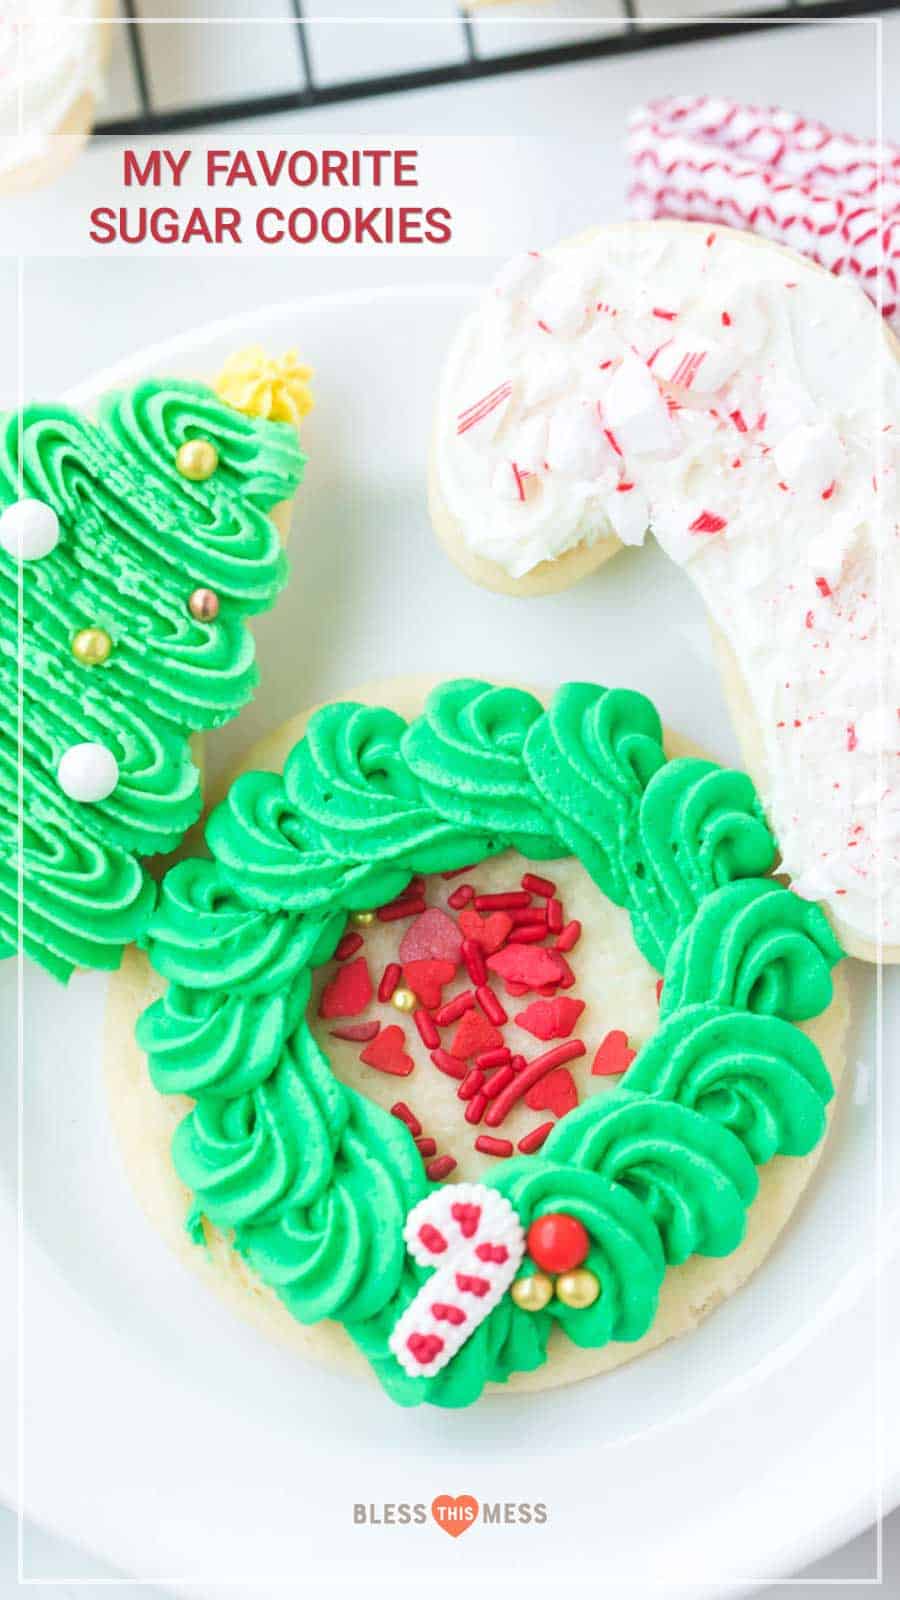 These perfect sugar cookies are moist and soft but keep their shape well, and are perfect for any holiday occasion! They're simple to make, too. Just make the dough, chill it, roll it, shape it, and bake it! And of course, don't forget to decorate it. #sugarcookies #sugarcookie #sugarcookierecipe #baking #cookies #cookierecipe #christmascookies